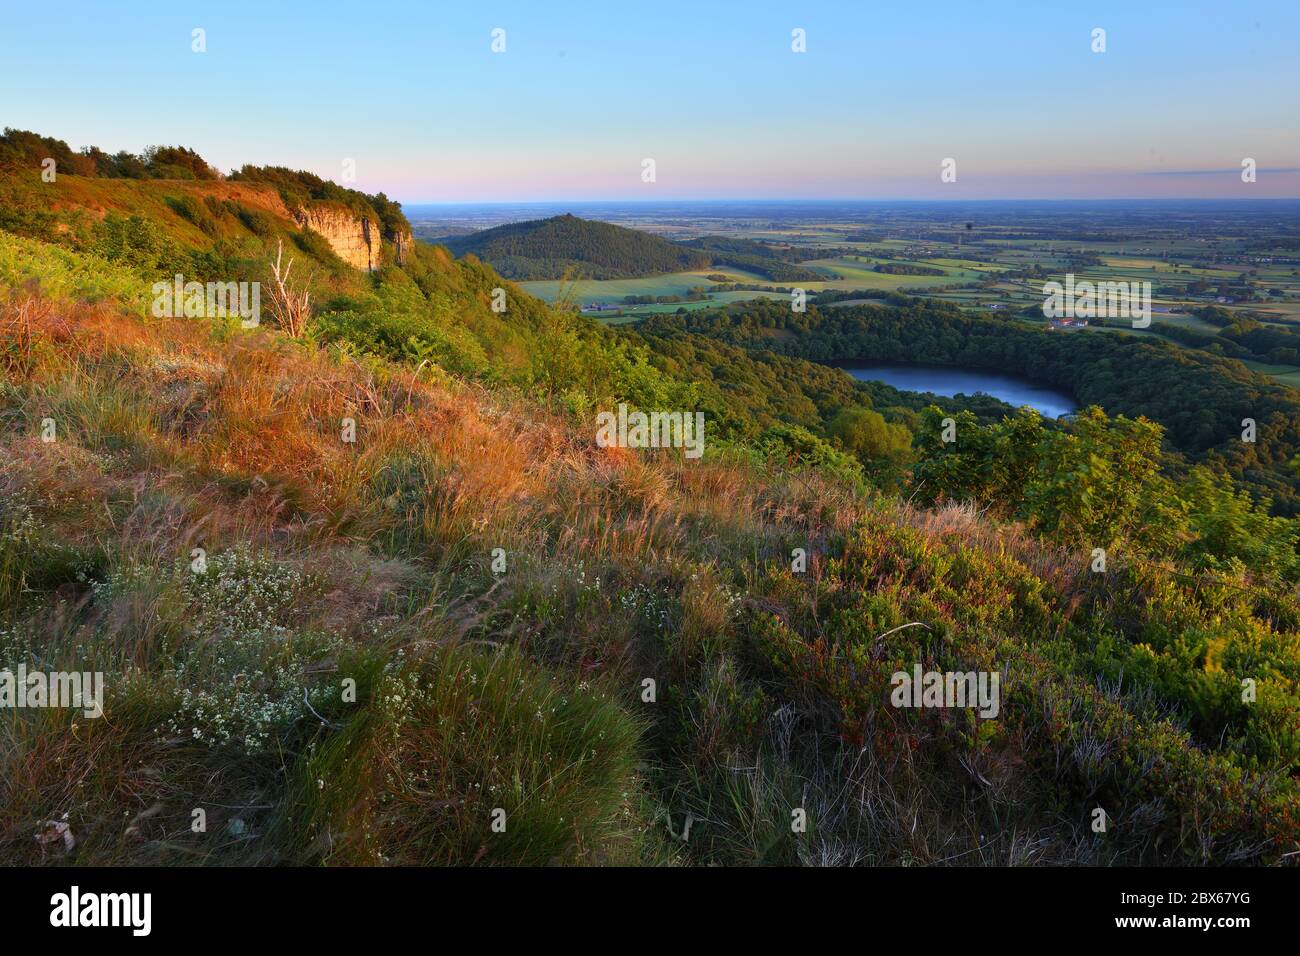 Elevated View of North Yorkshire and Lake Gormire from Sutton Bank near Thirsk, North Yorkshire Moors National Park, England, UK Stock Photo